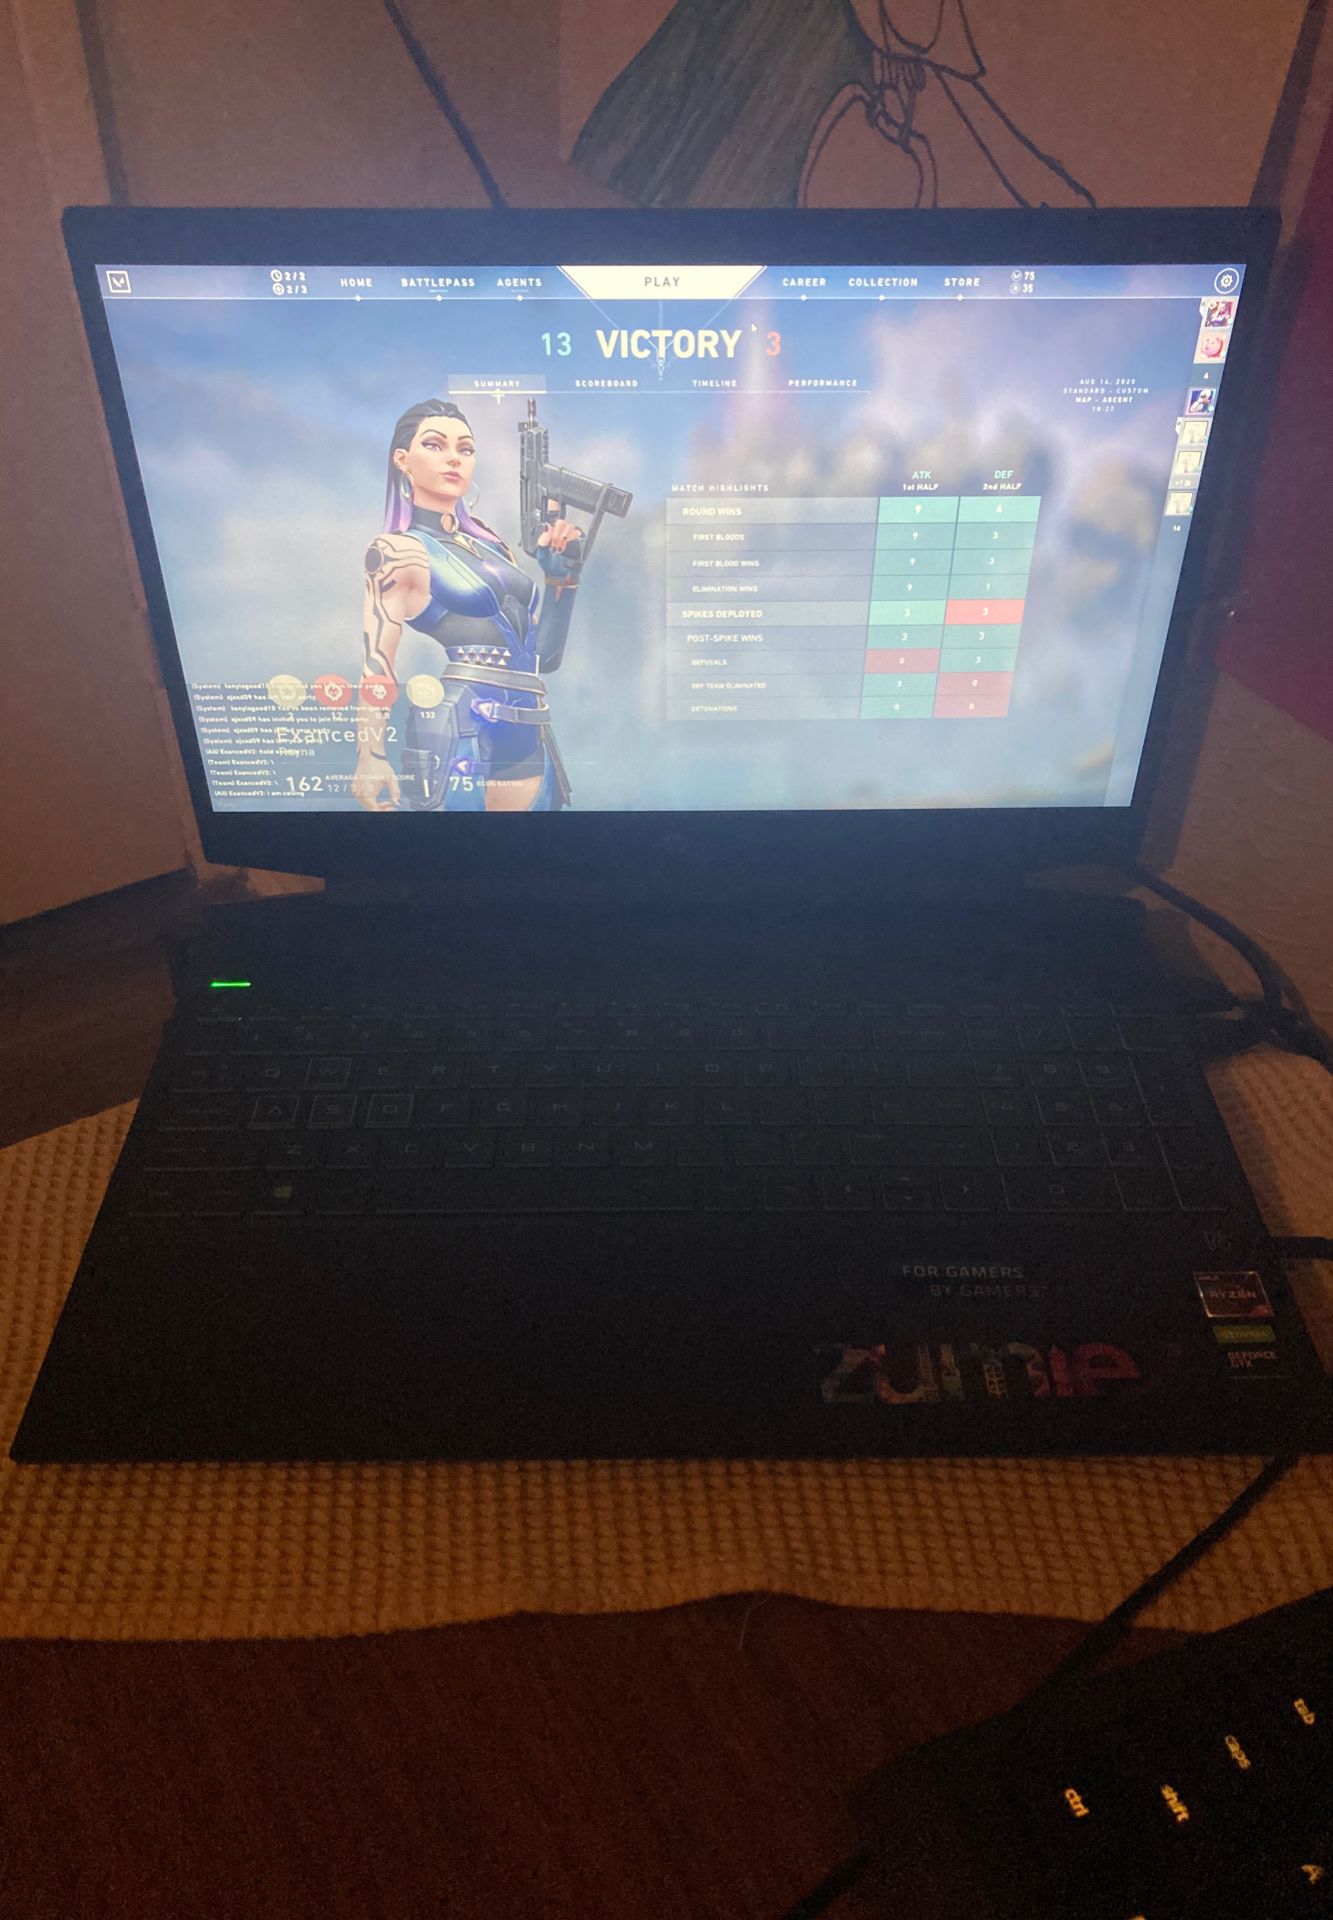 Hp pavilion gaming laptop with razer cynosa elite keyboard and a mouse